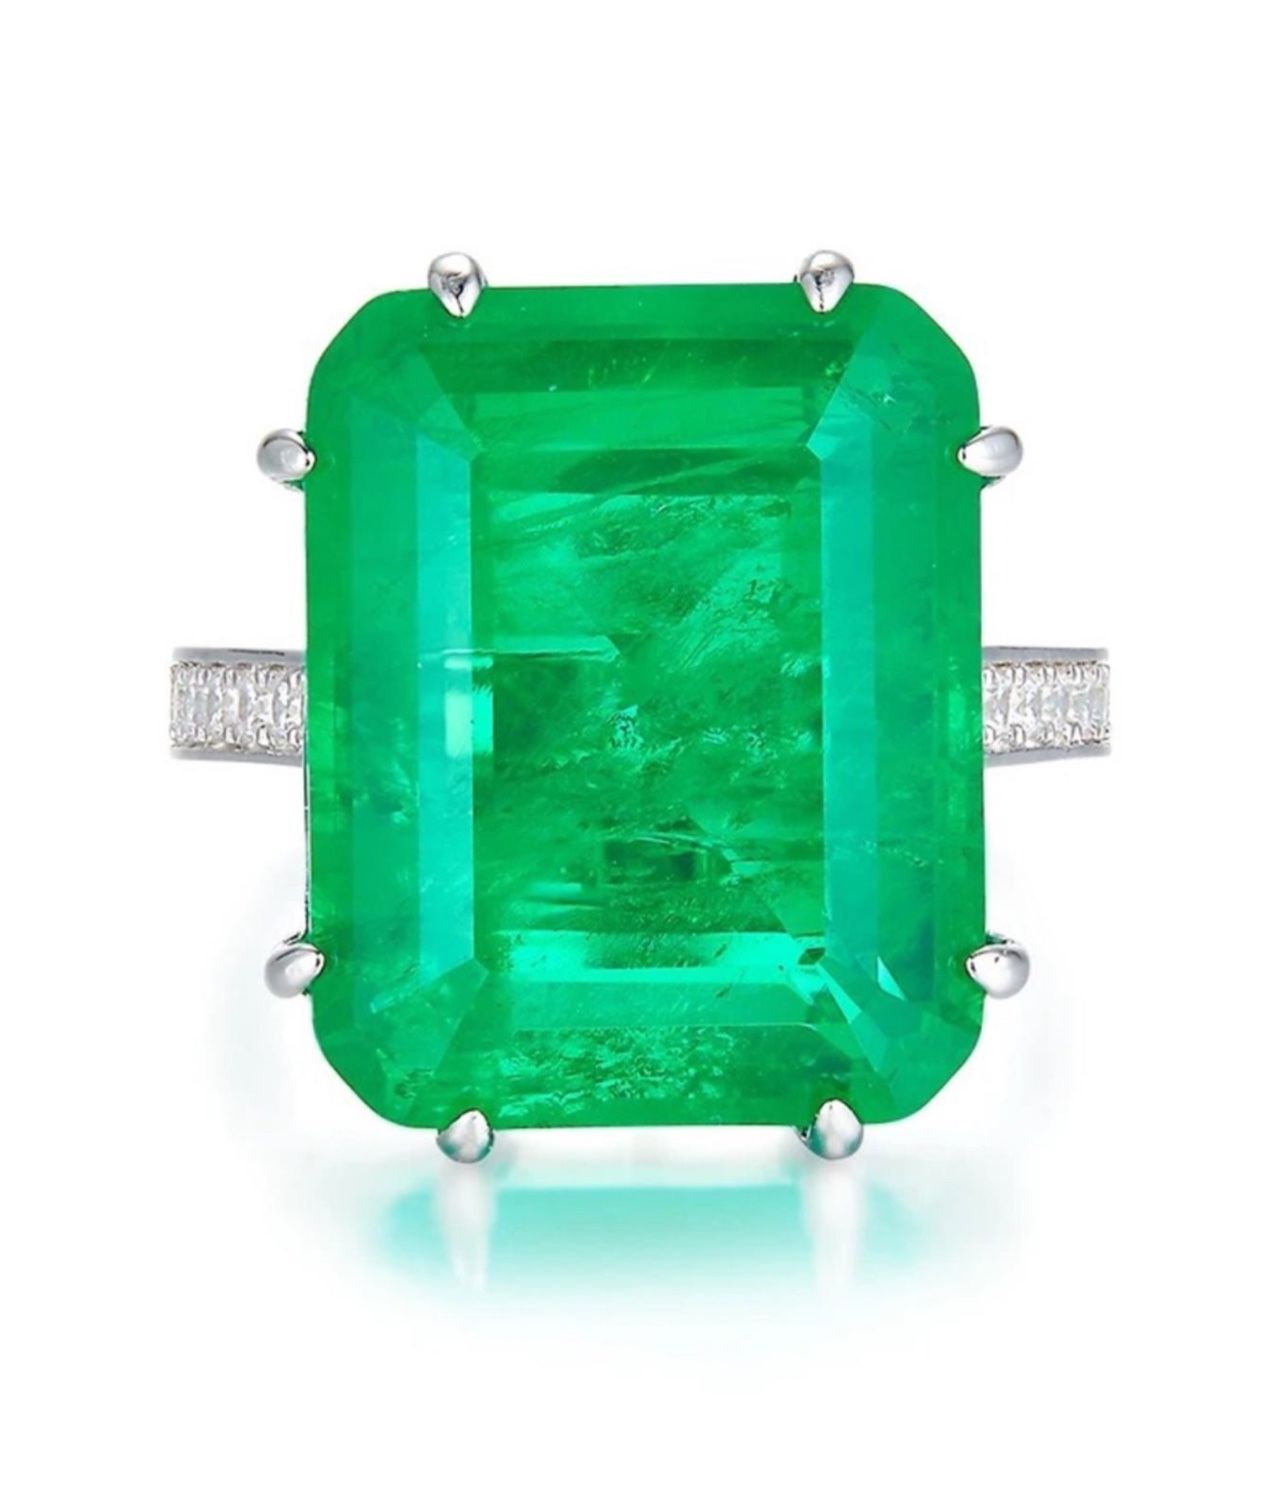 ✅Luxury Inlay Emerald Stone Ring Jewelry Solid 925 Sterling Silver Rings For Women Size 6,7,8